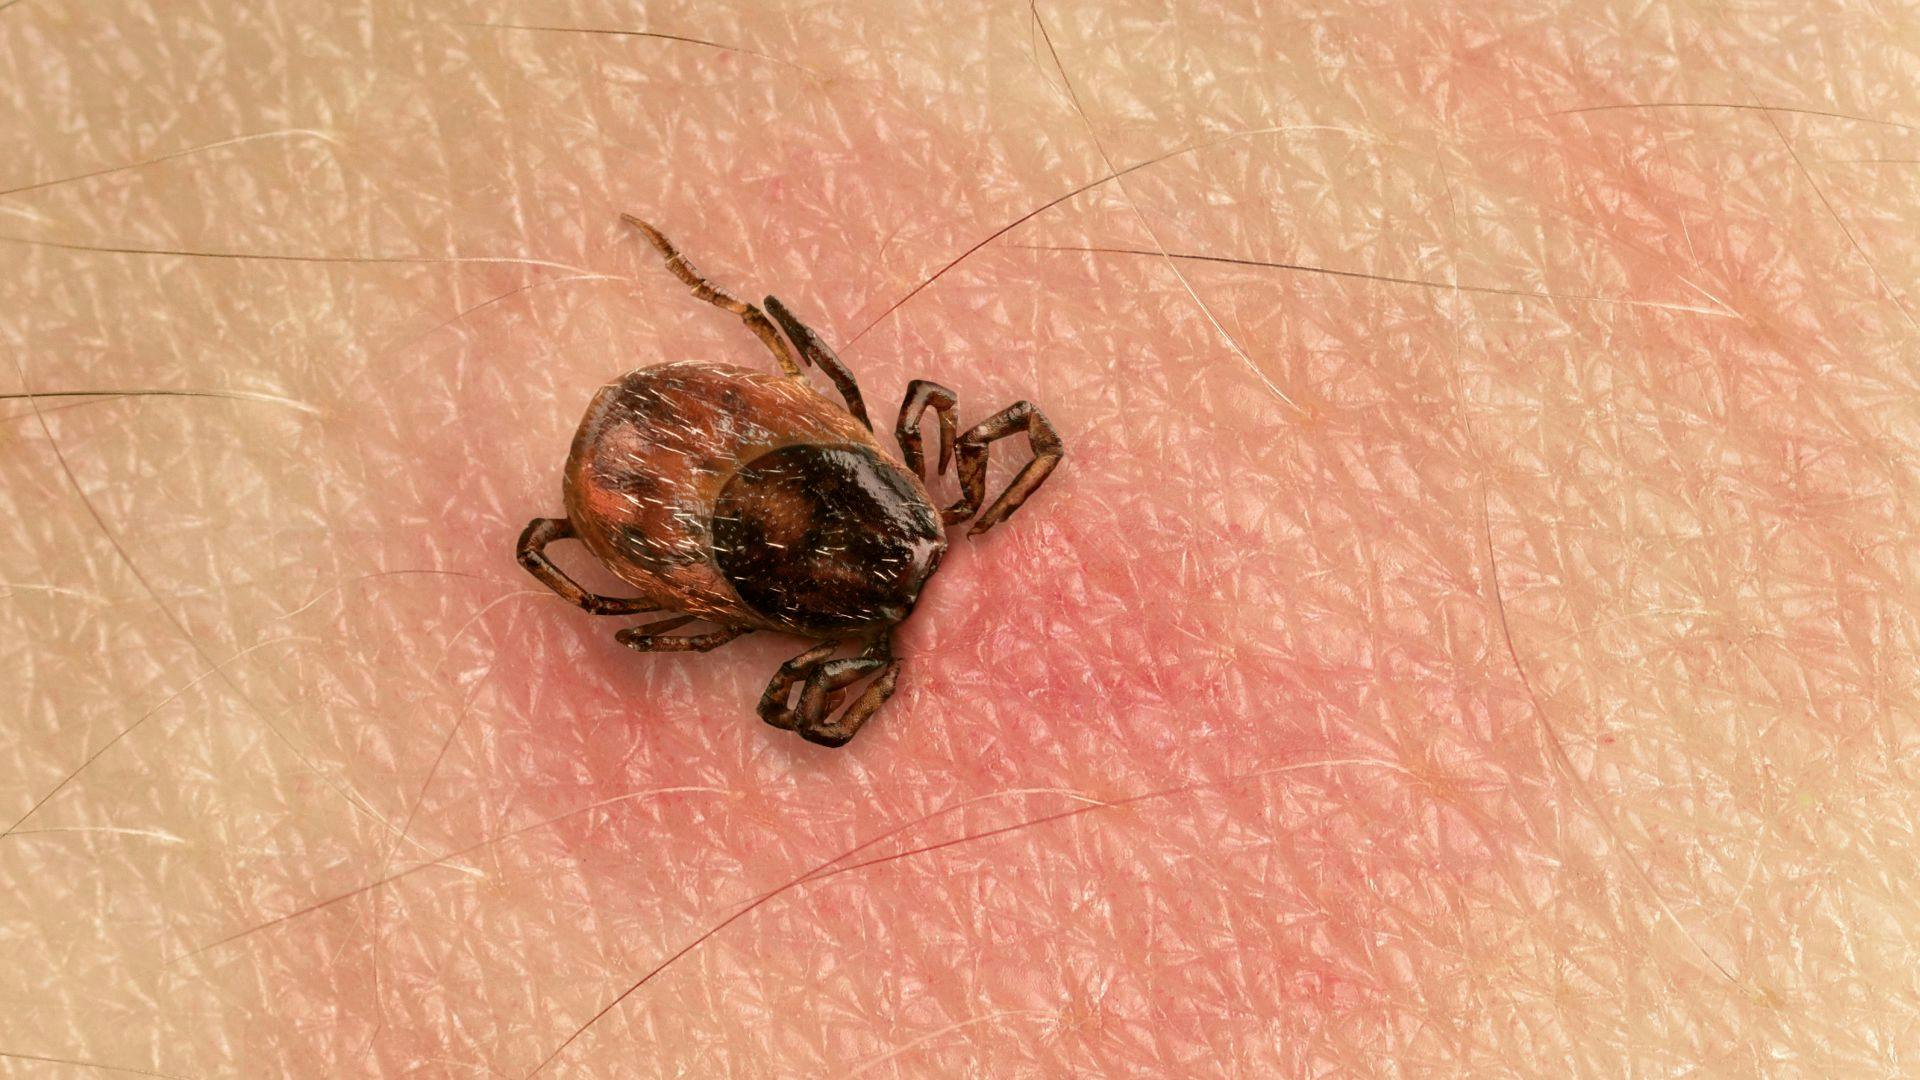 Study Shows Evidence of Severe and Lingering Symptoms in Some After Treatment for Lyme Disease